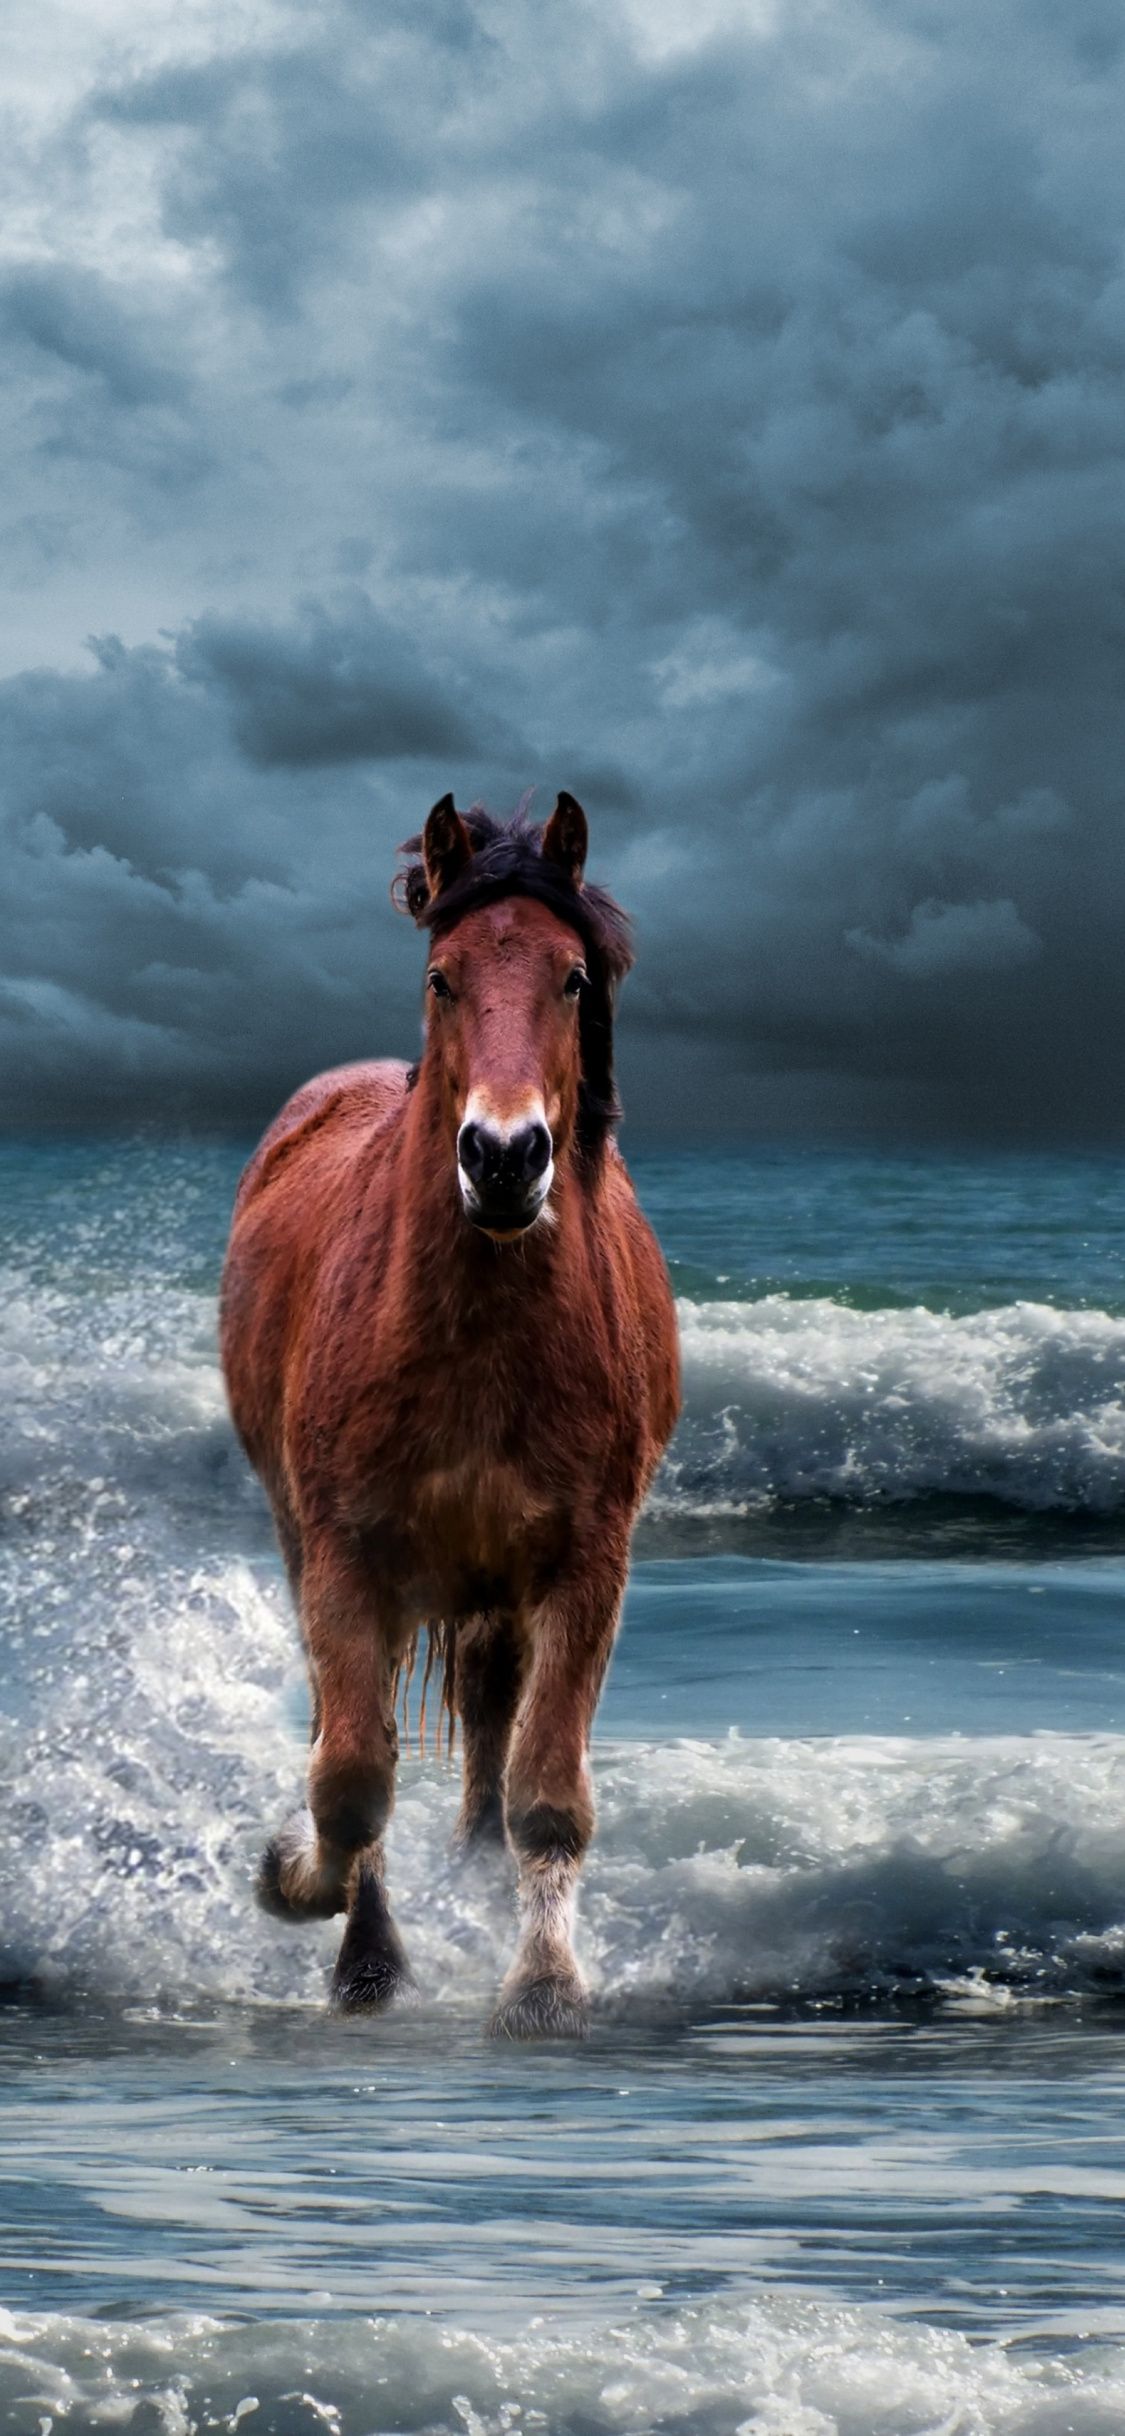 Download See the majestic beauty of this horse on your iPhone Wallpaper   Wallpaperscom